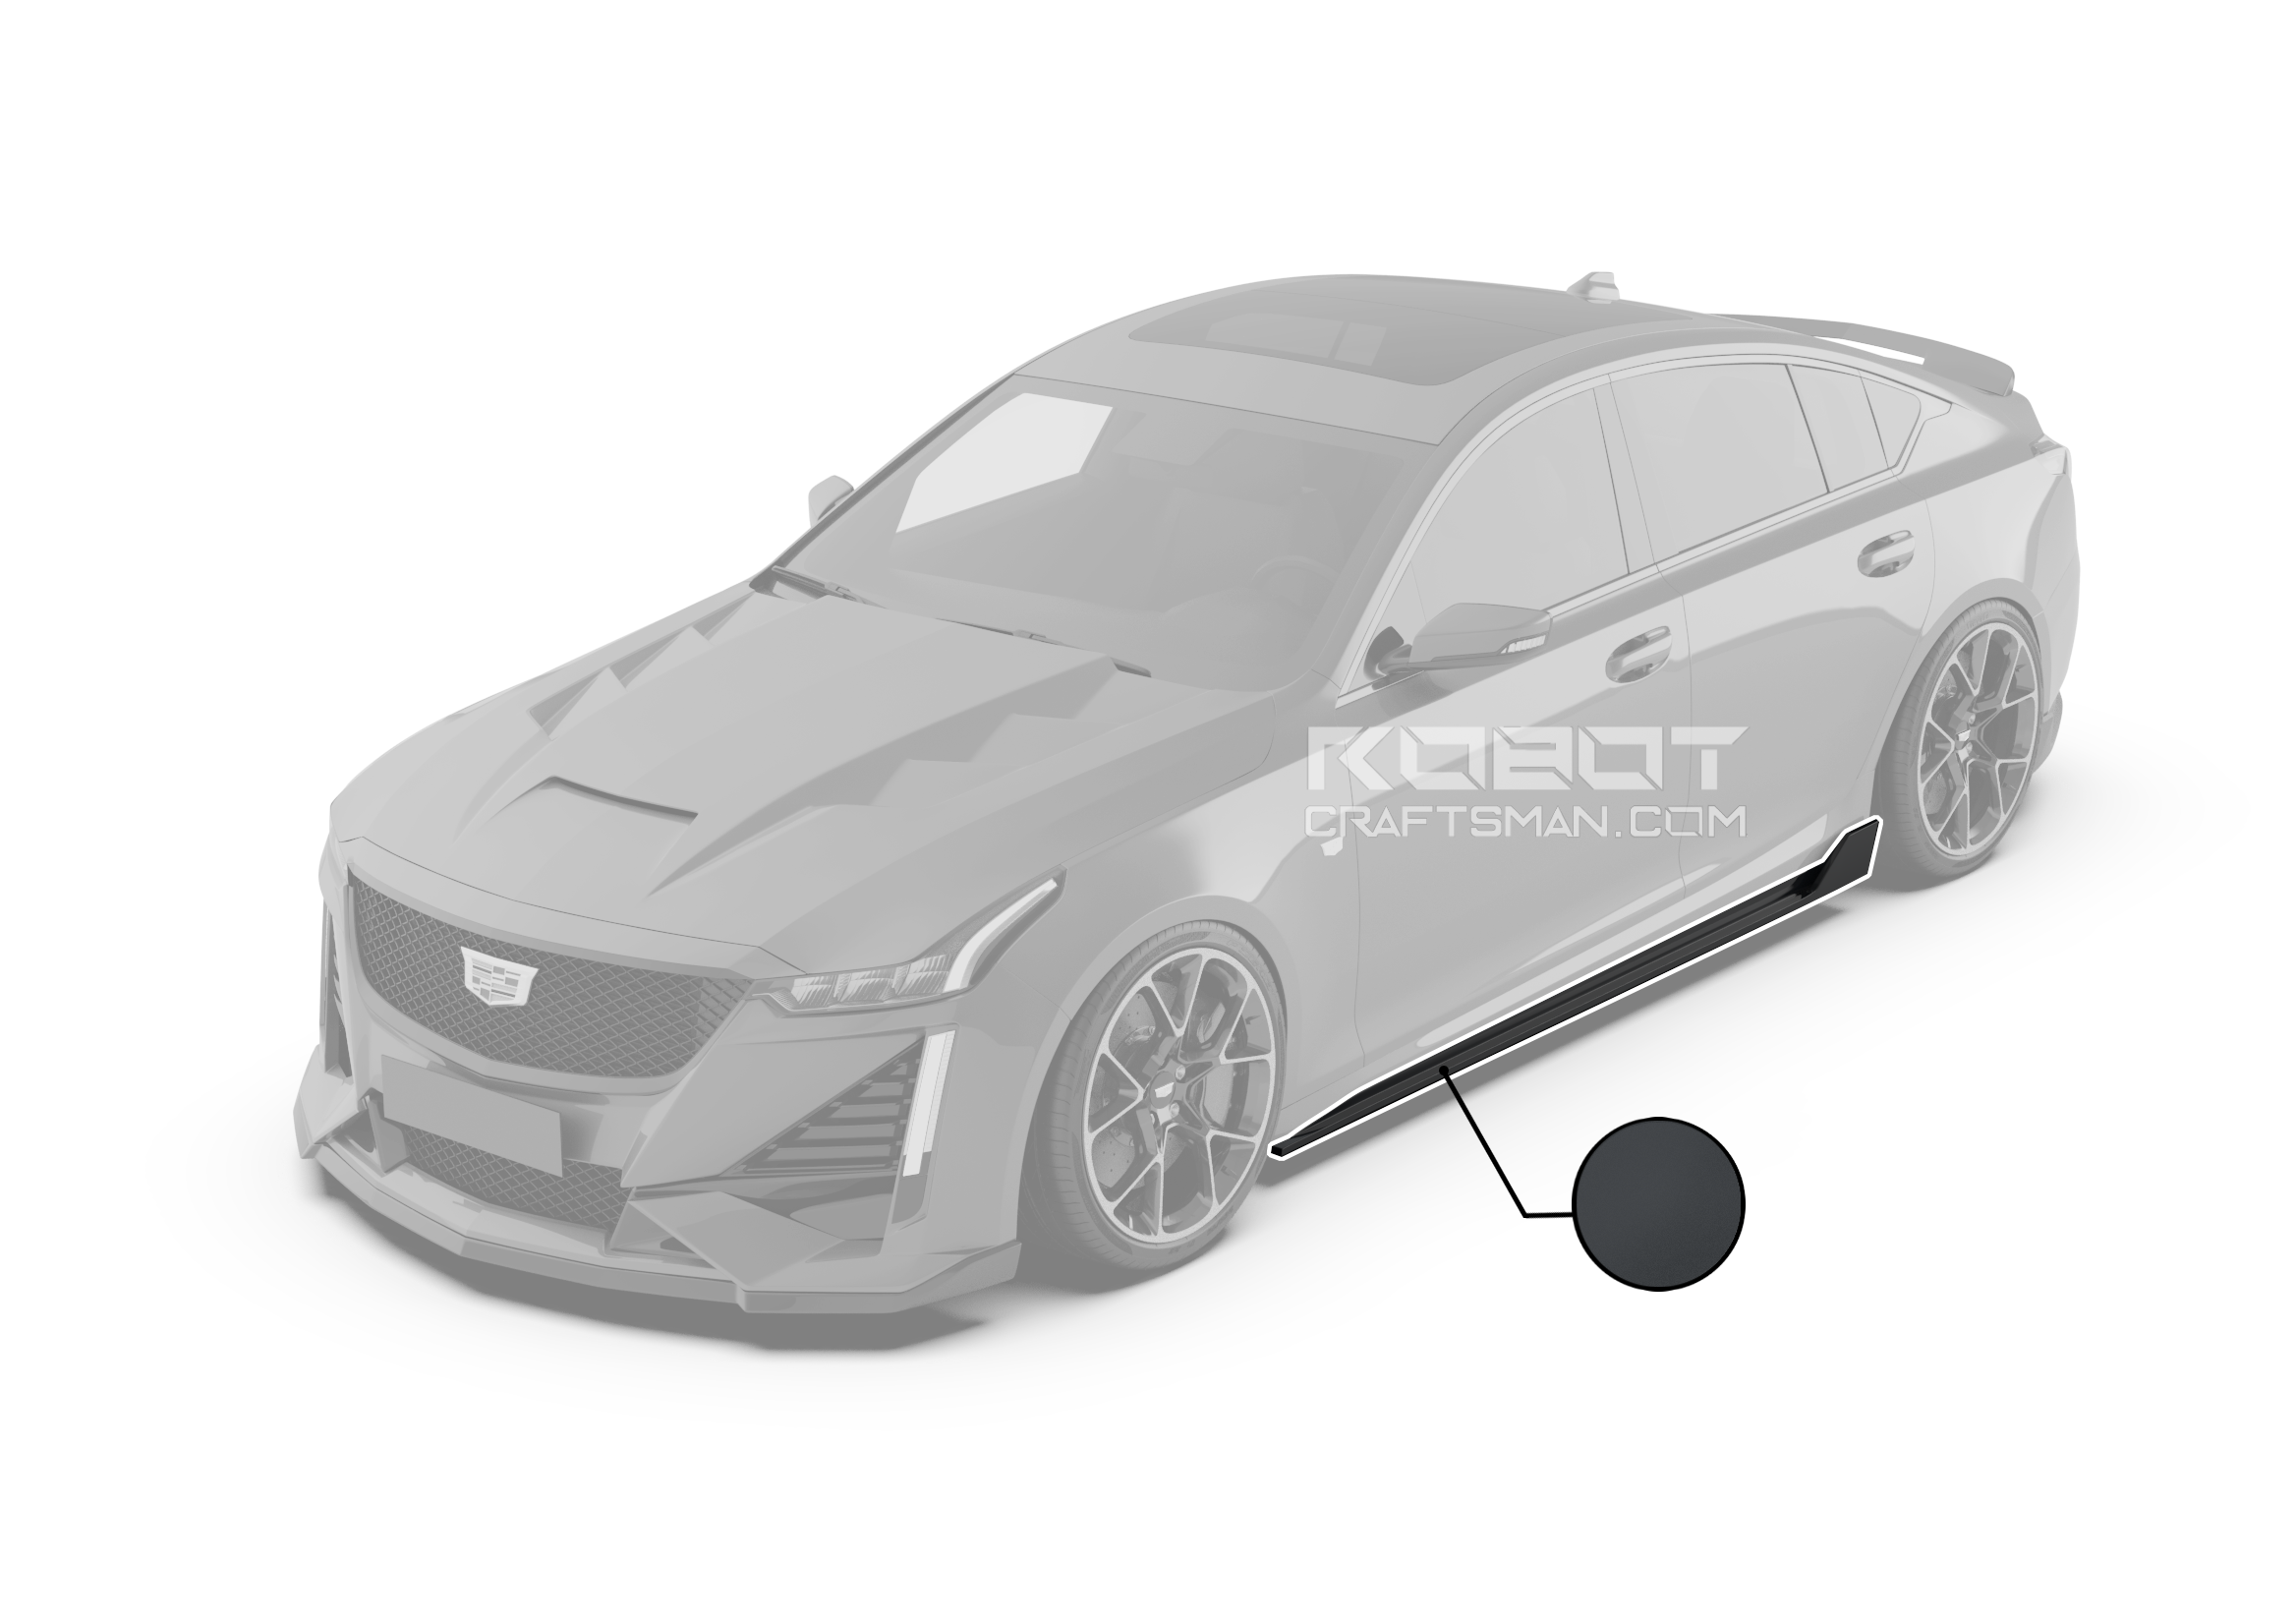 ROBOT CRAFTSMAN "PRISM" Side Skirts Extensions For Cadillac CT5 FRP or Carbon Fiber